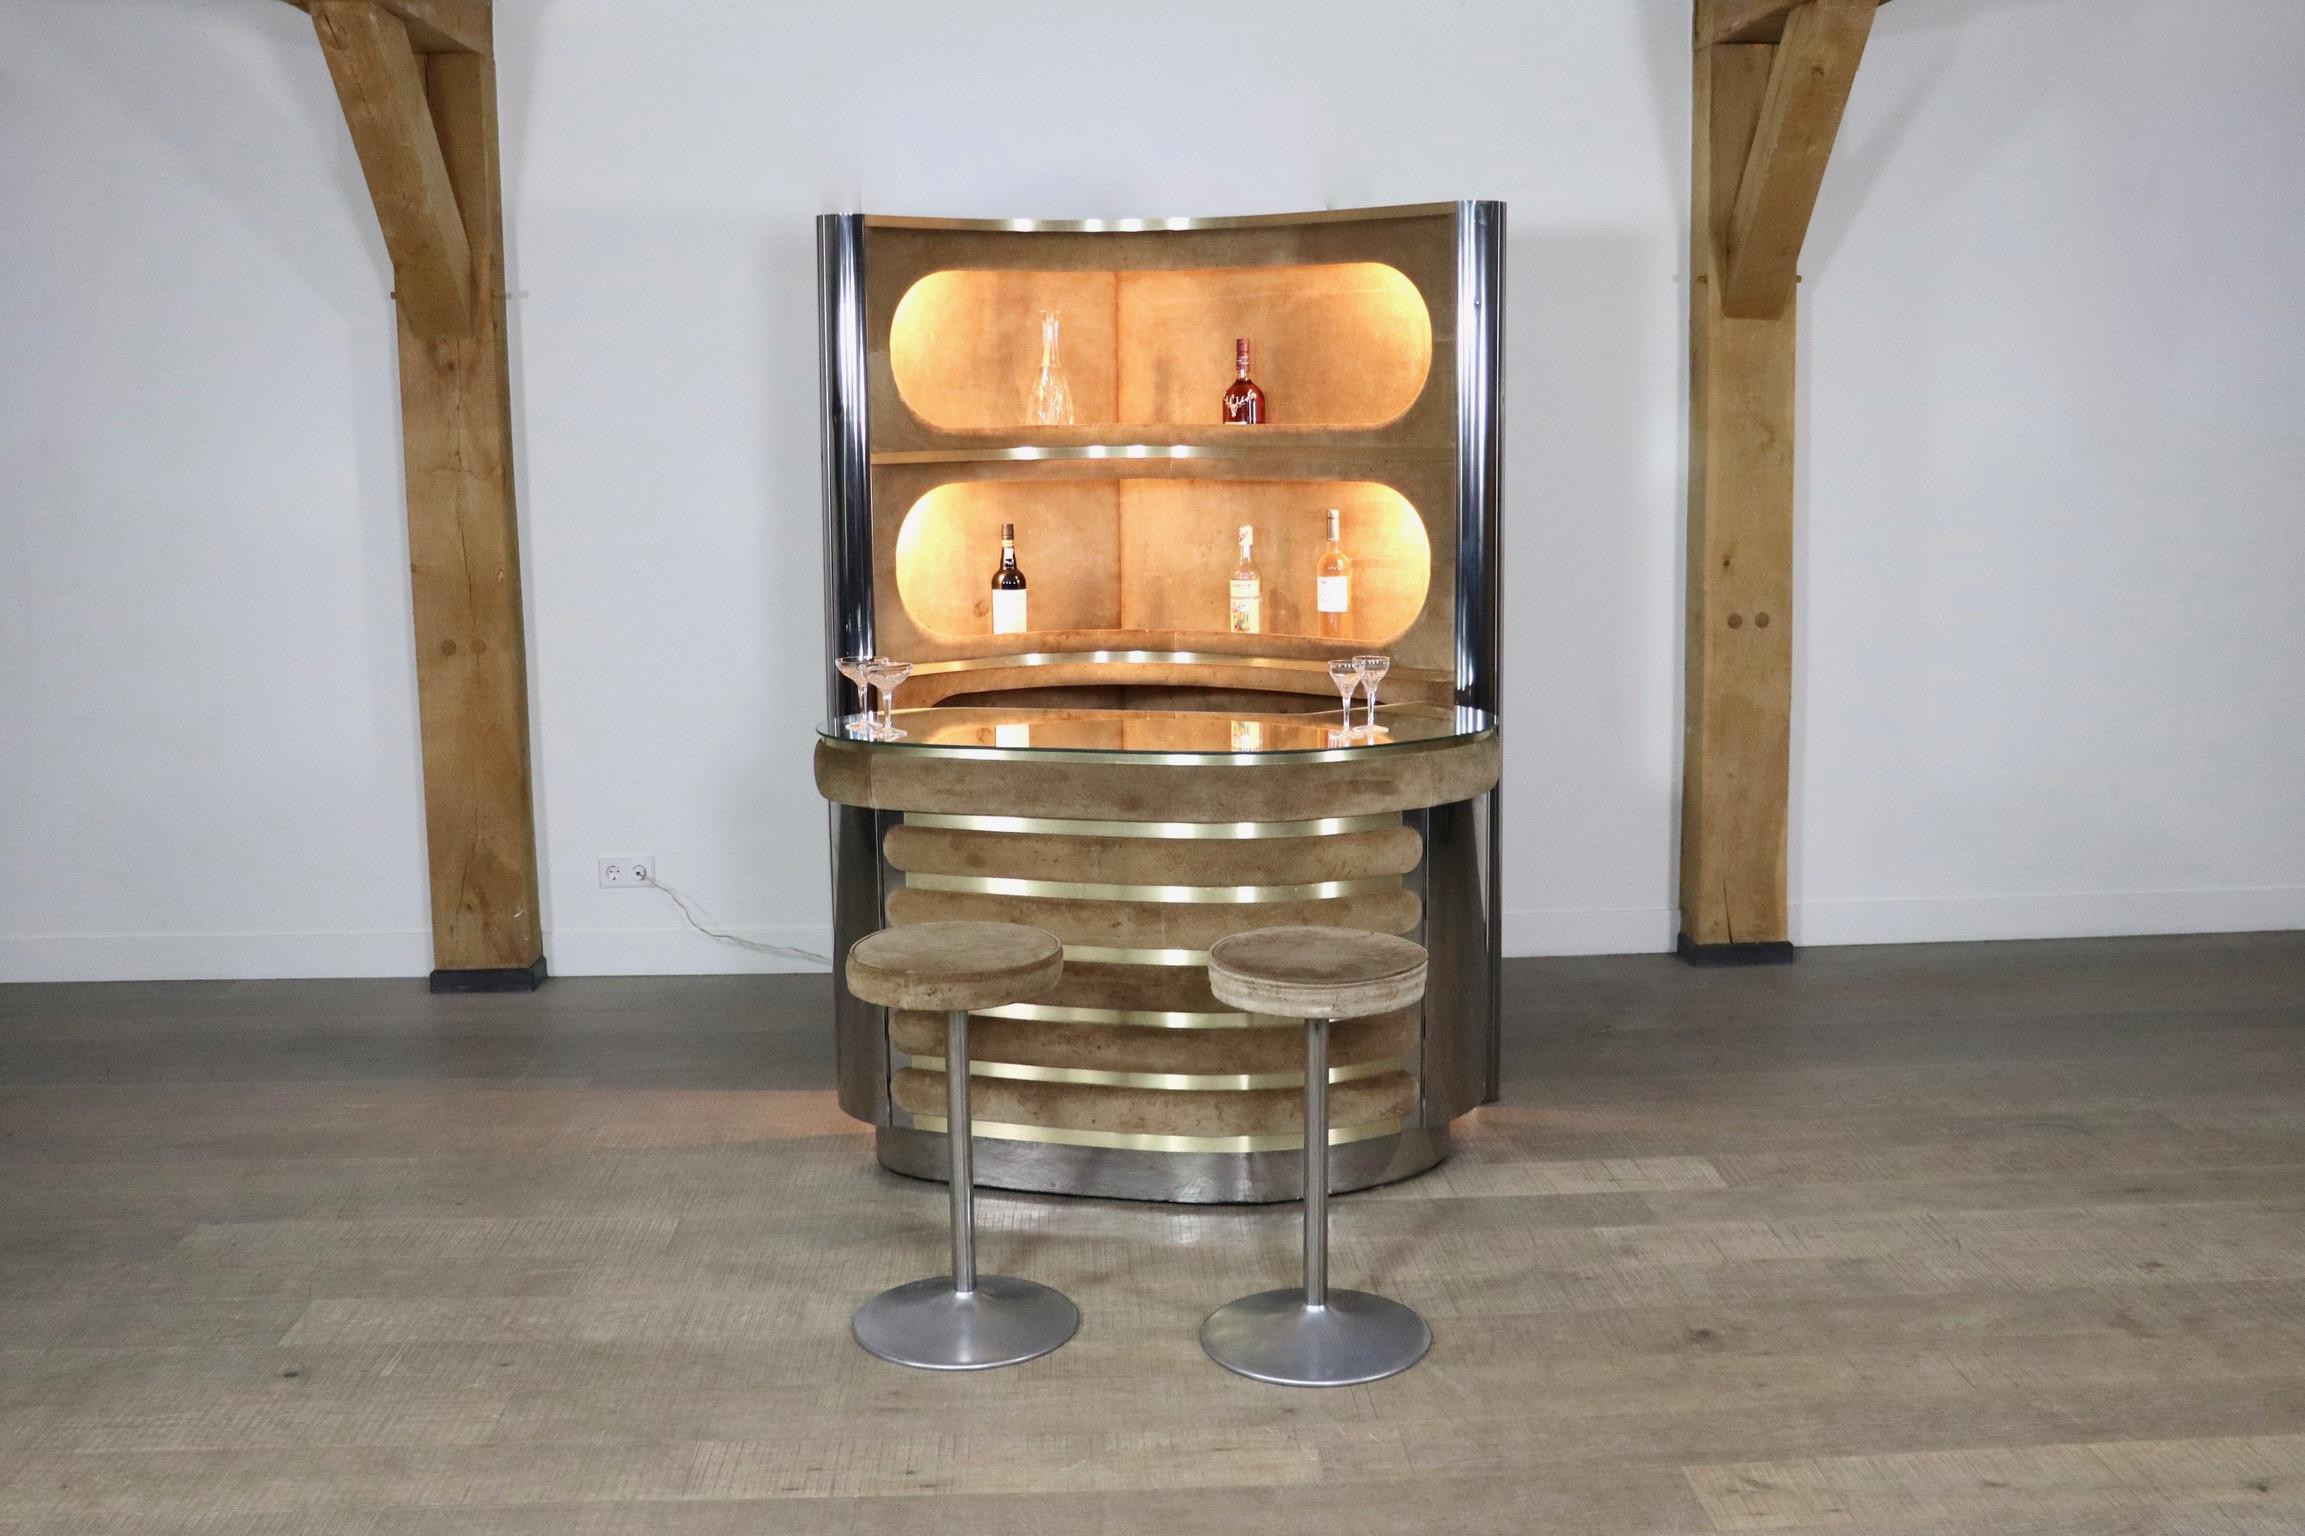 Incredible suede and chrome bar attributed to Willy Rizzo 1970s. With original mirror counter, working lights, original refrigerator and two barstools. With this bar, any room will be elevated to a classy and luxurious space with the perfect